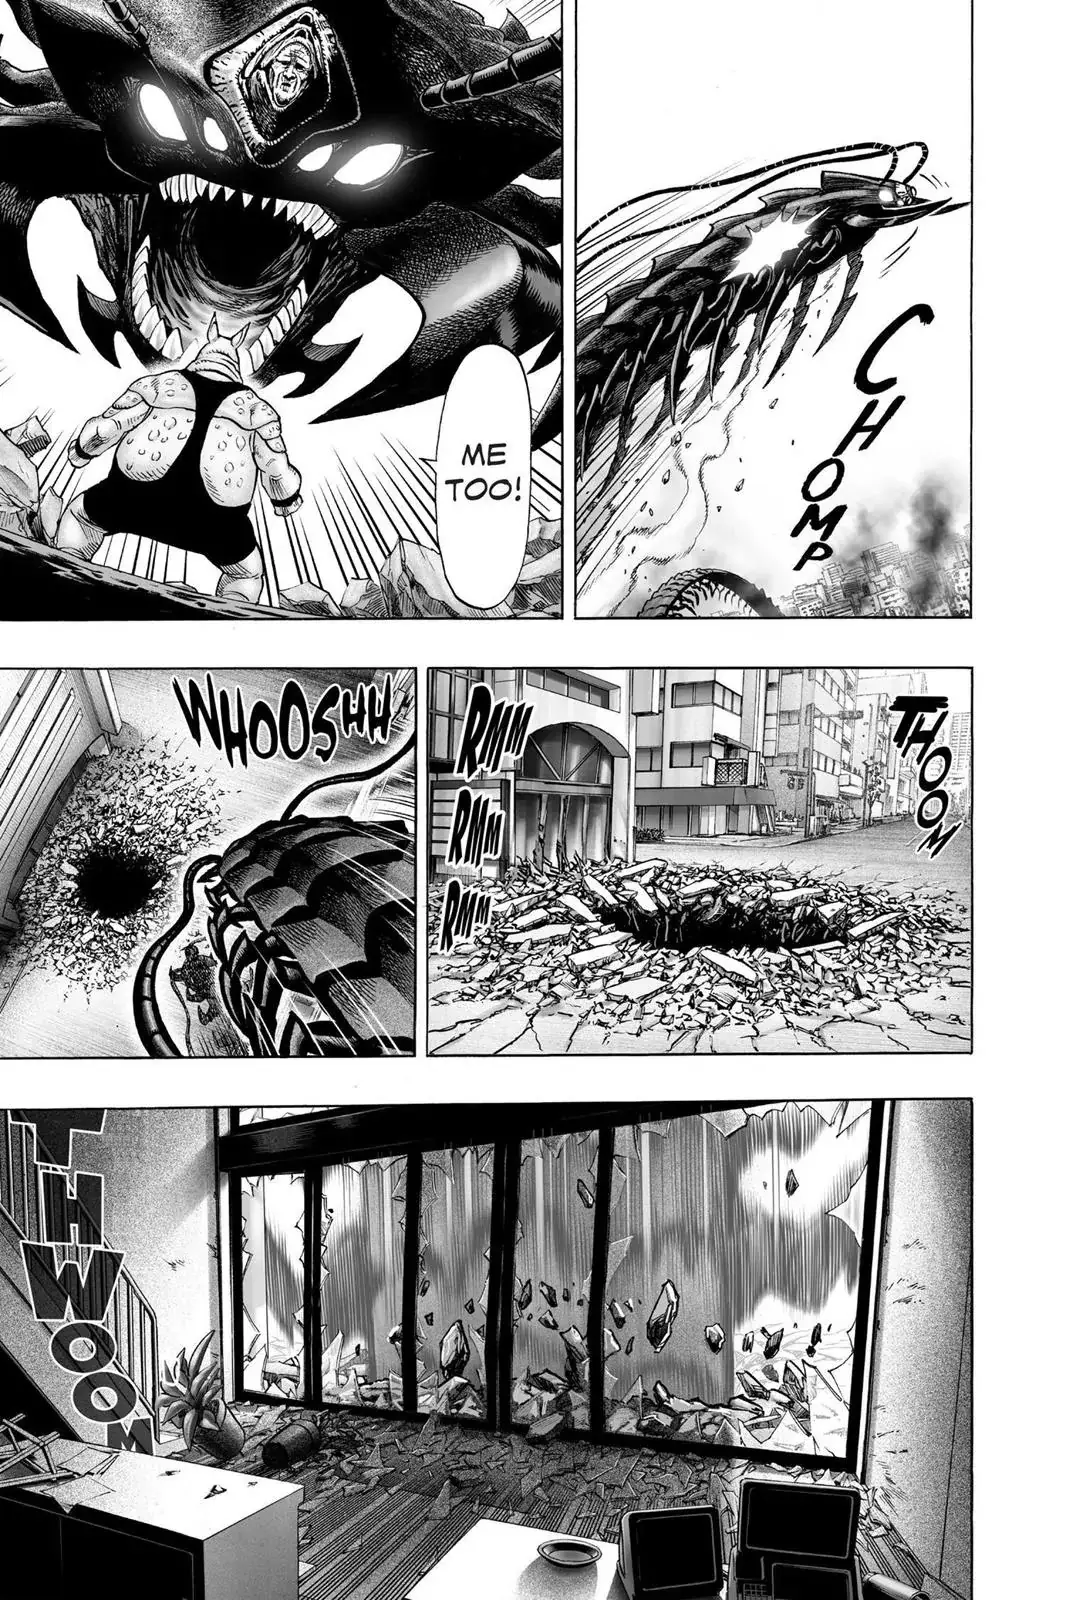 One Punch Man Chapter 59, READ One Punch Man Chapter 59 ONLINE, lost in the cloud genre,lost in the cloud gif,lost in the cloud girl,lost in the cloud goods,lost in the cloud goodreads,lost in the cloud,lost ark cloud gaming,lost odyssey cloud gaming,lost in the cloud fanart,lost in the cloud fanfic,lost in the cloud fandom,lost in the cloud first kiss,lost in the cloud font,lost in the cloud ending,lost in the cloud episode 97,lost in the cloud edit,lost in the cloud explained,lost in the cloud dog,lost in the cloud discord server,lost in the cloud desktop wallpaper,lost in the cloud drawing,can't find my cloud on network,lost in the cloud characters,lost in the cloud chapter 93 release date,lost in the cloud birthday,lost in the cloud birthday art,lost in the cloud background,lost in the cloud banner,lost in the clouds meaning,what is the black cloud in lost,lost in the cloud ao3,lost in the cloud anime,lost in the cloud art,lost in the cloud author twitter,lost in the cloud author instagram,lost in the cloud artist,lost in the cloud acrylic stand,lost in the cloud artist twitter,lost in the cloud art style,lost in the cloud analysis